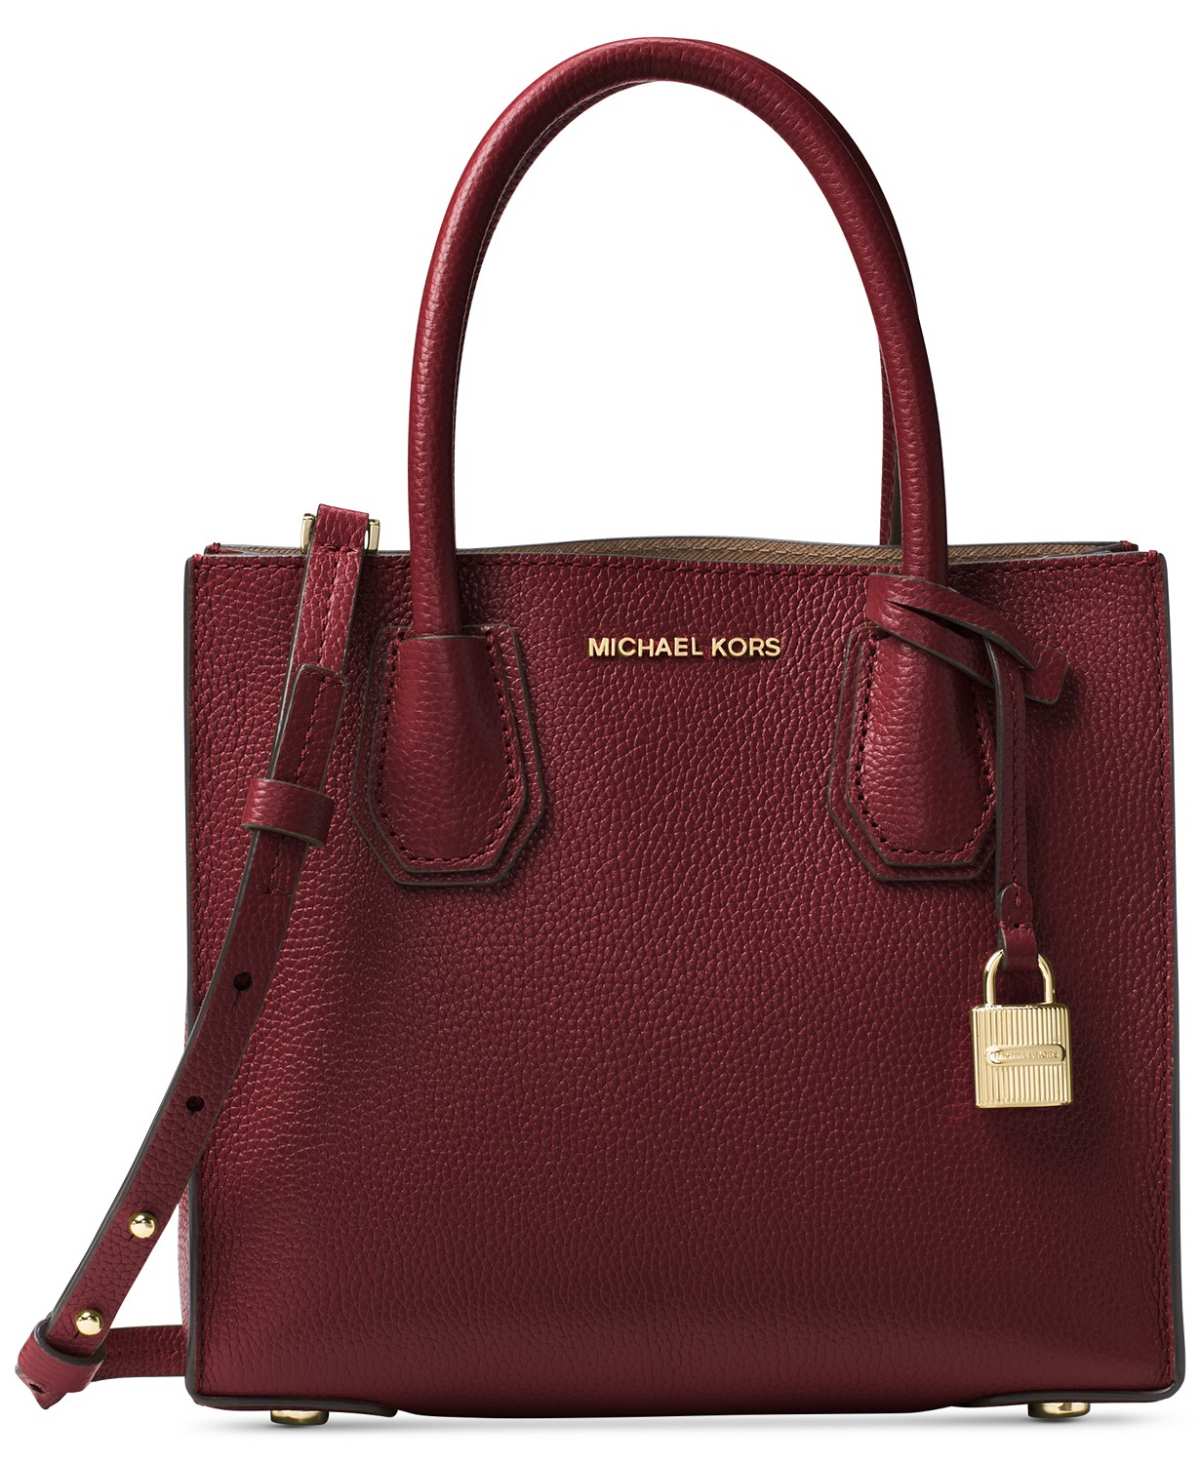 Real Michael Kors bag - clothing & accessories - by owner - apparel sale -  craigslist